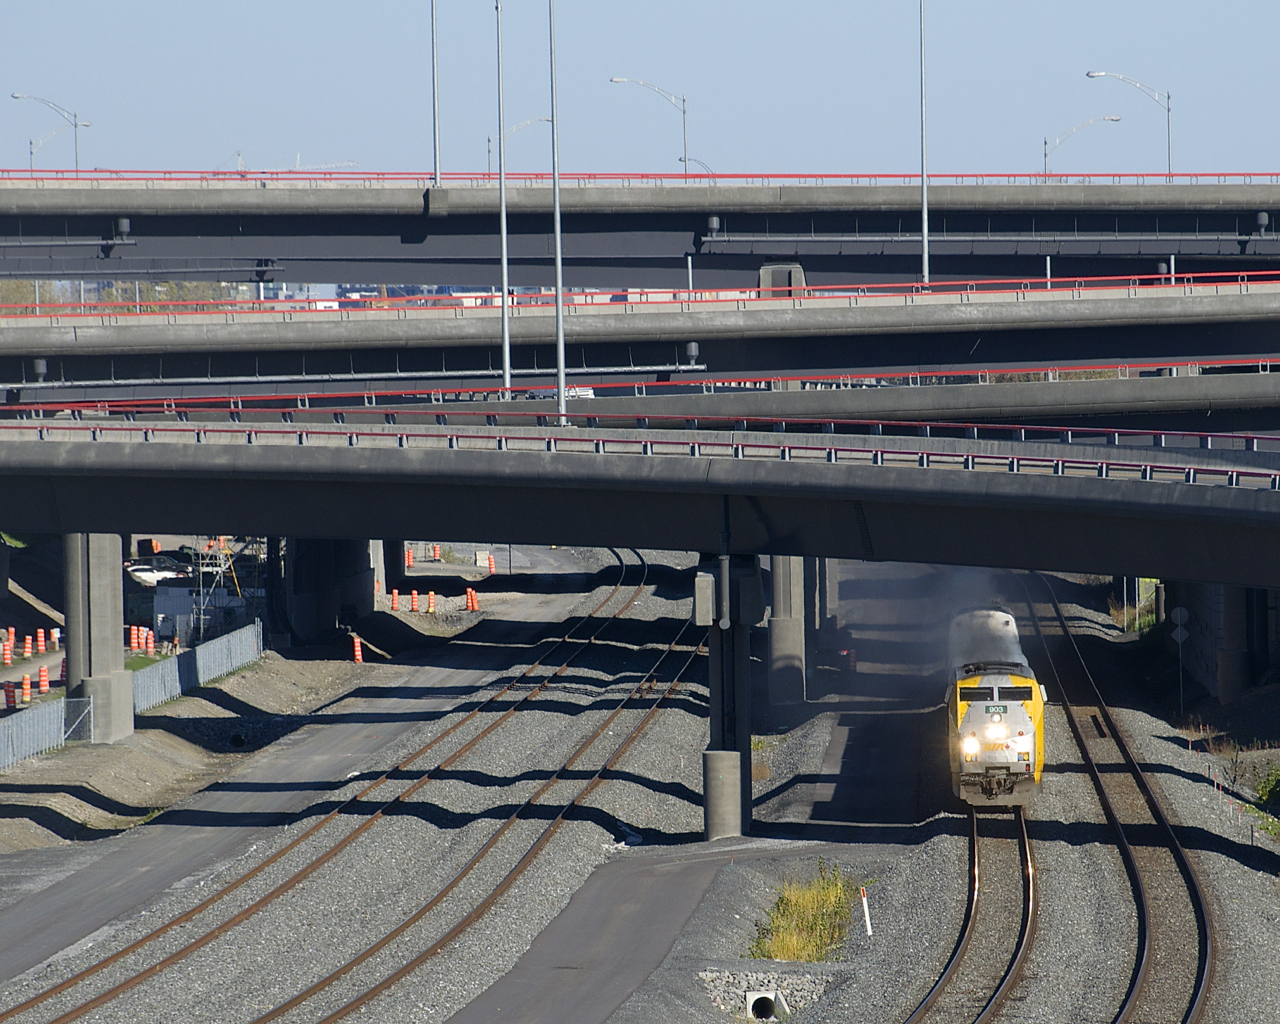 VIA 903 leads VIA 67, passing underneath the newly reconstructed Turcot interchange.